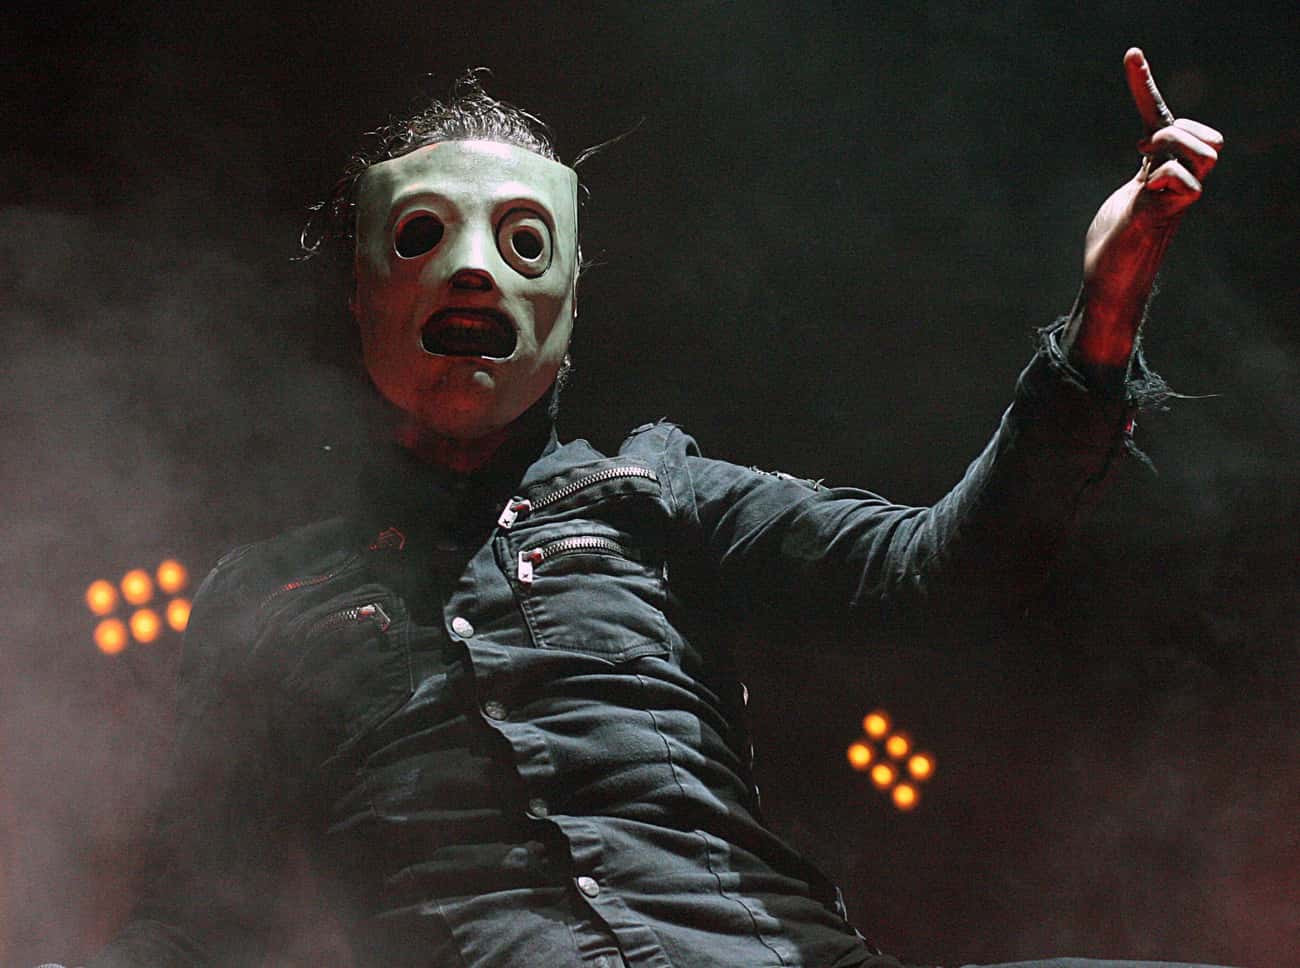 A Competitive Relationship With Marilyn Manson Led To Corey Taylor Drinking His Own Vomit